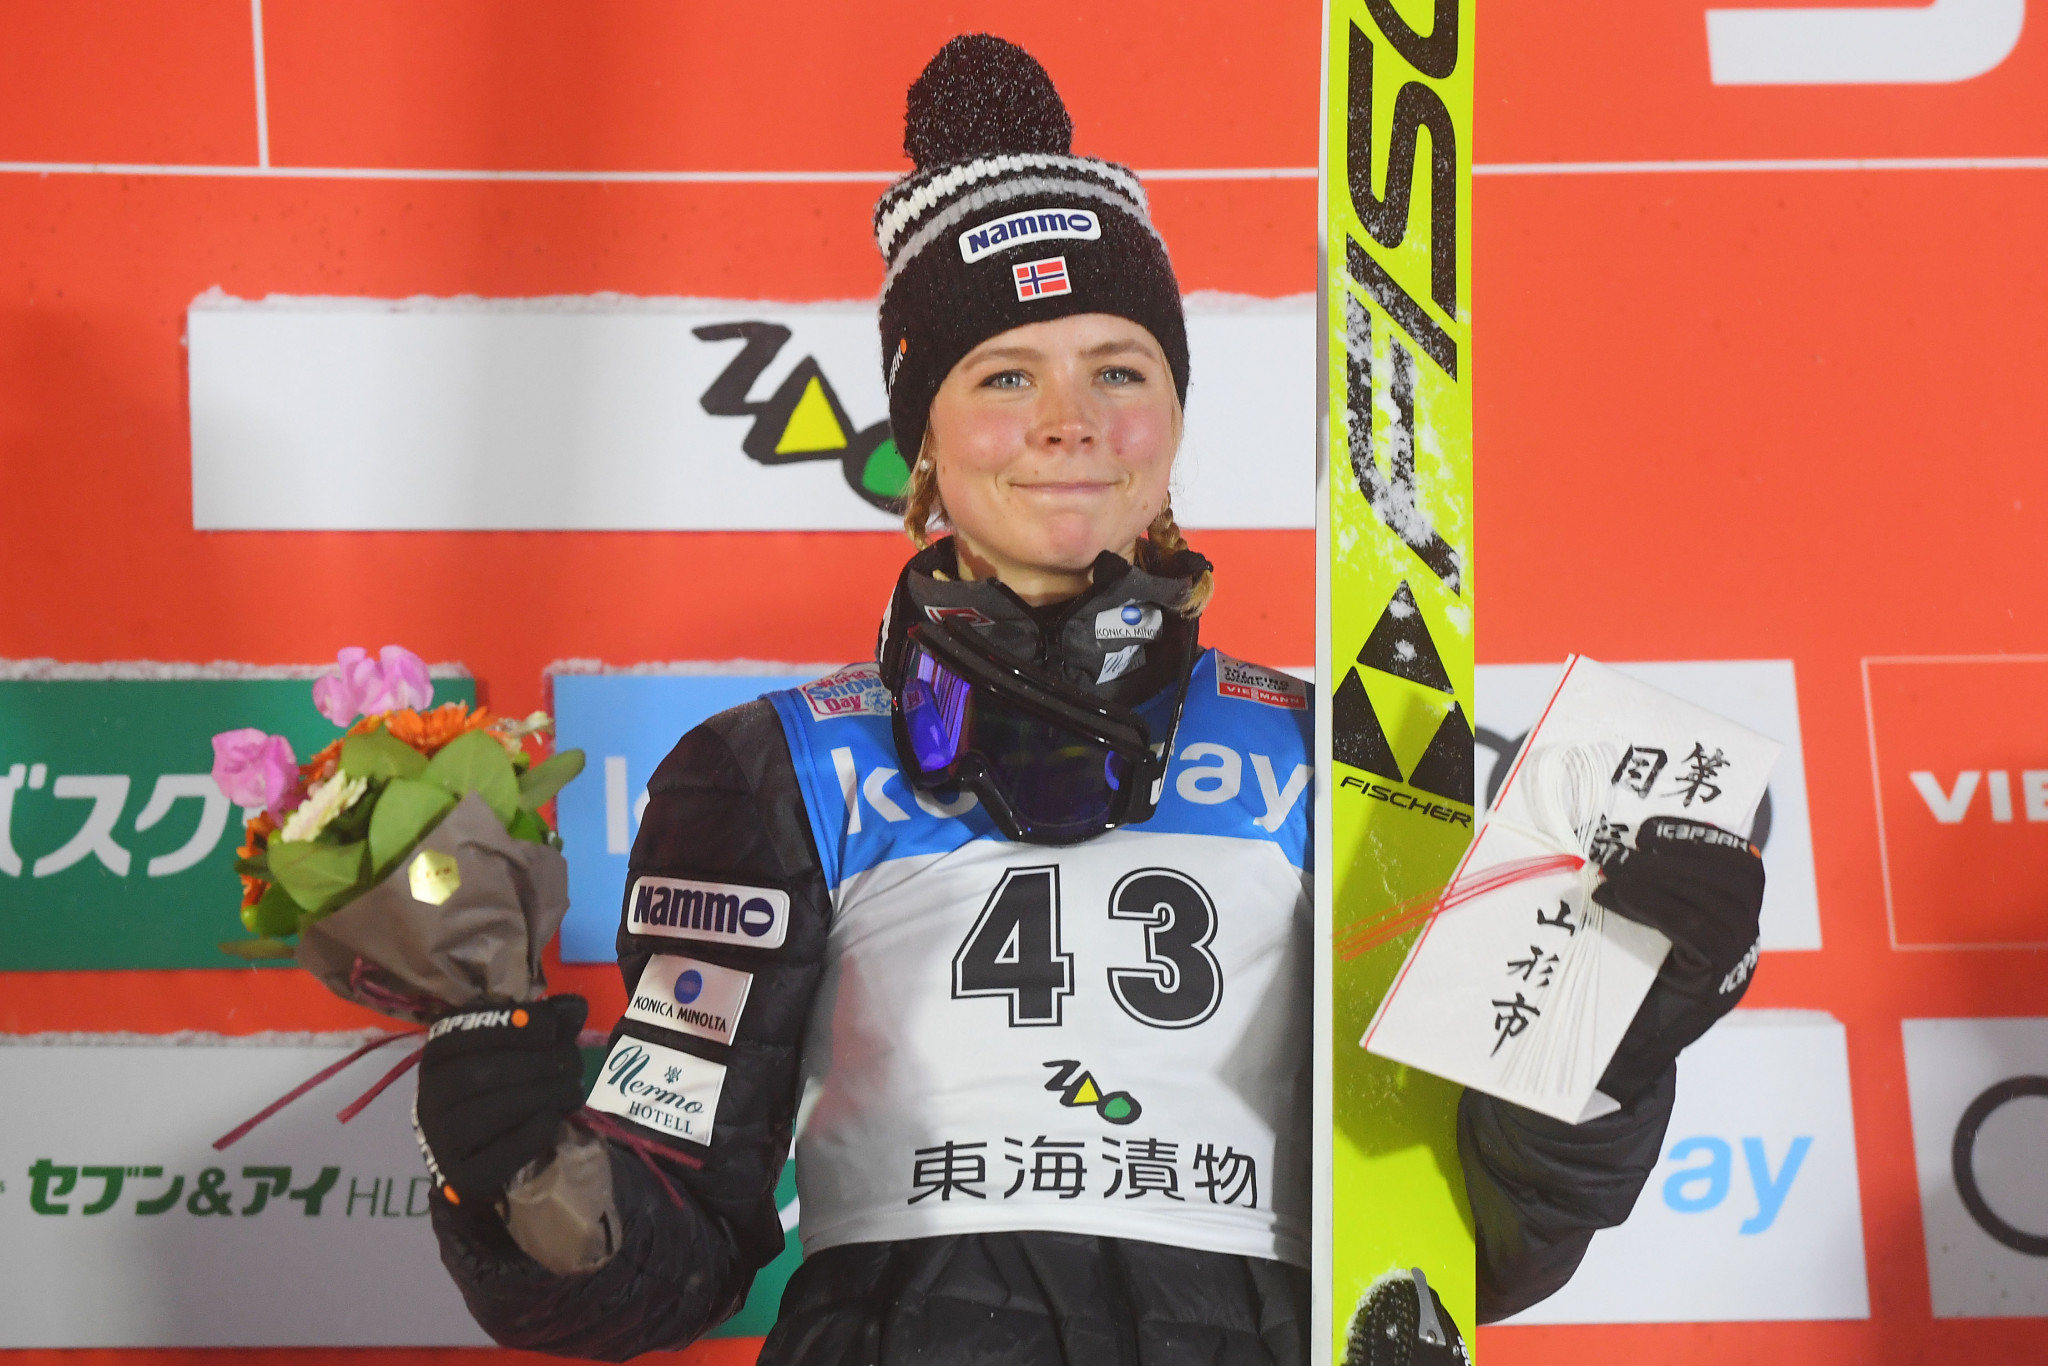 Olympic champion Maren Lundby of Norway won the FIS Ski Jumping World Cup event in Zao ©Getty Images